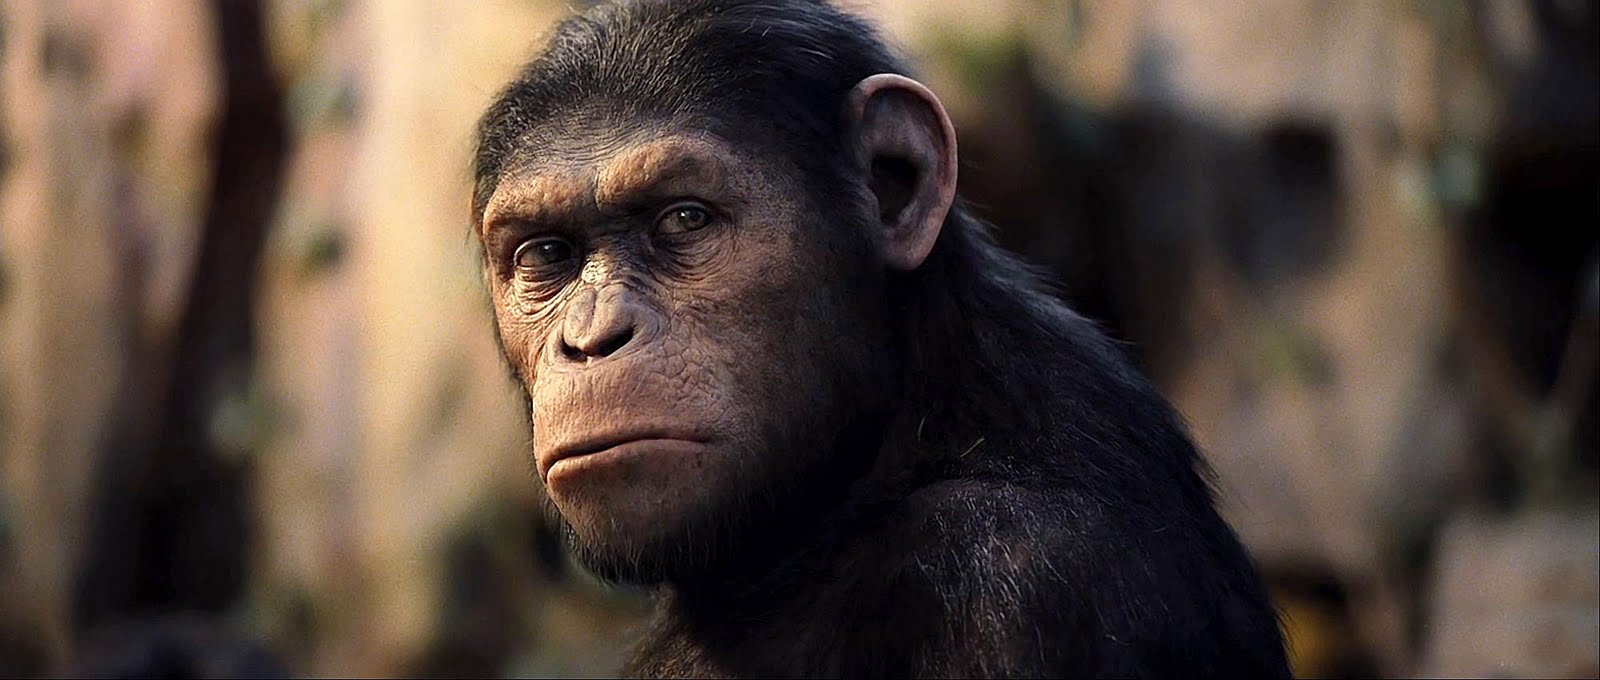 Rise of the Planet of the Apes latest movie wallpaper (3)